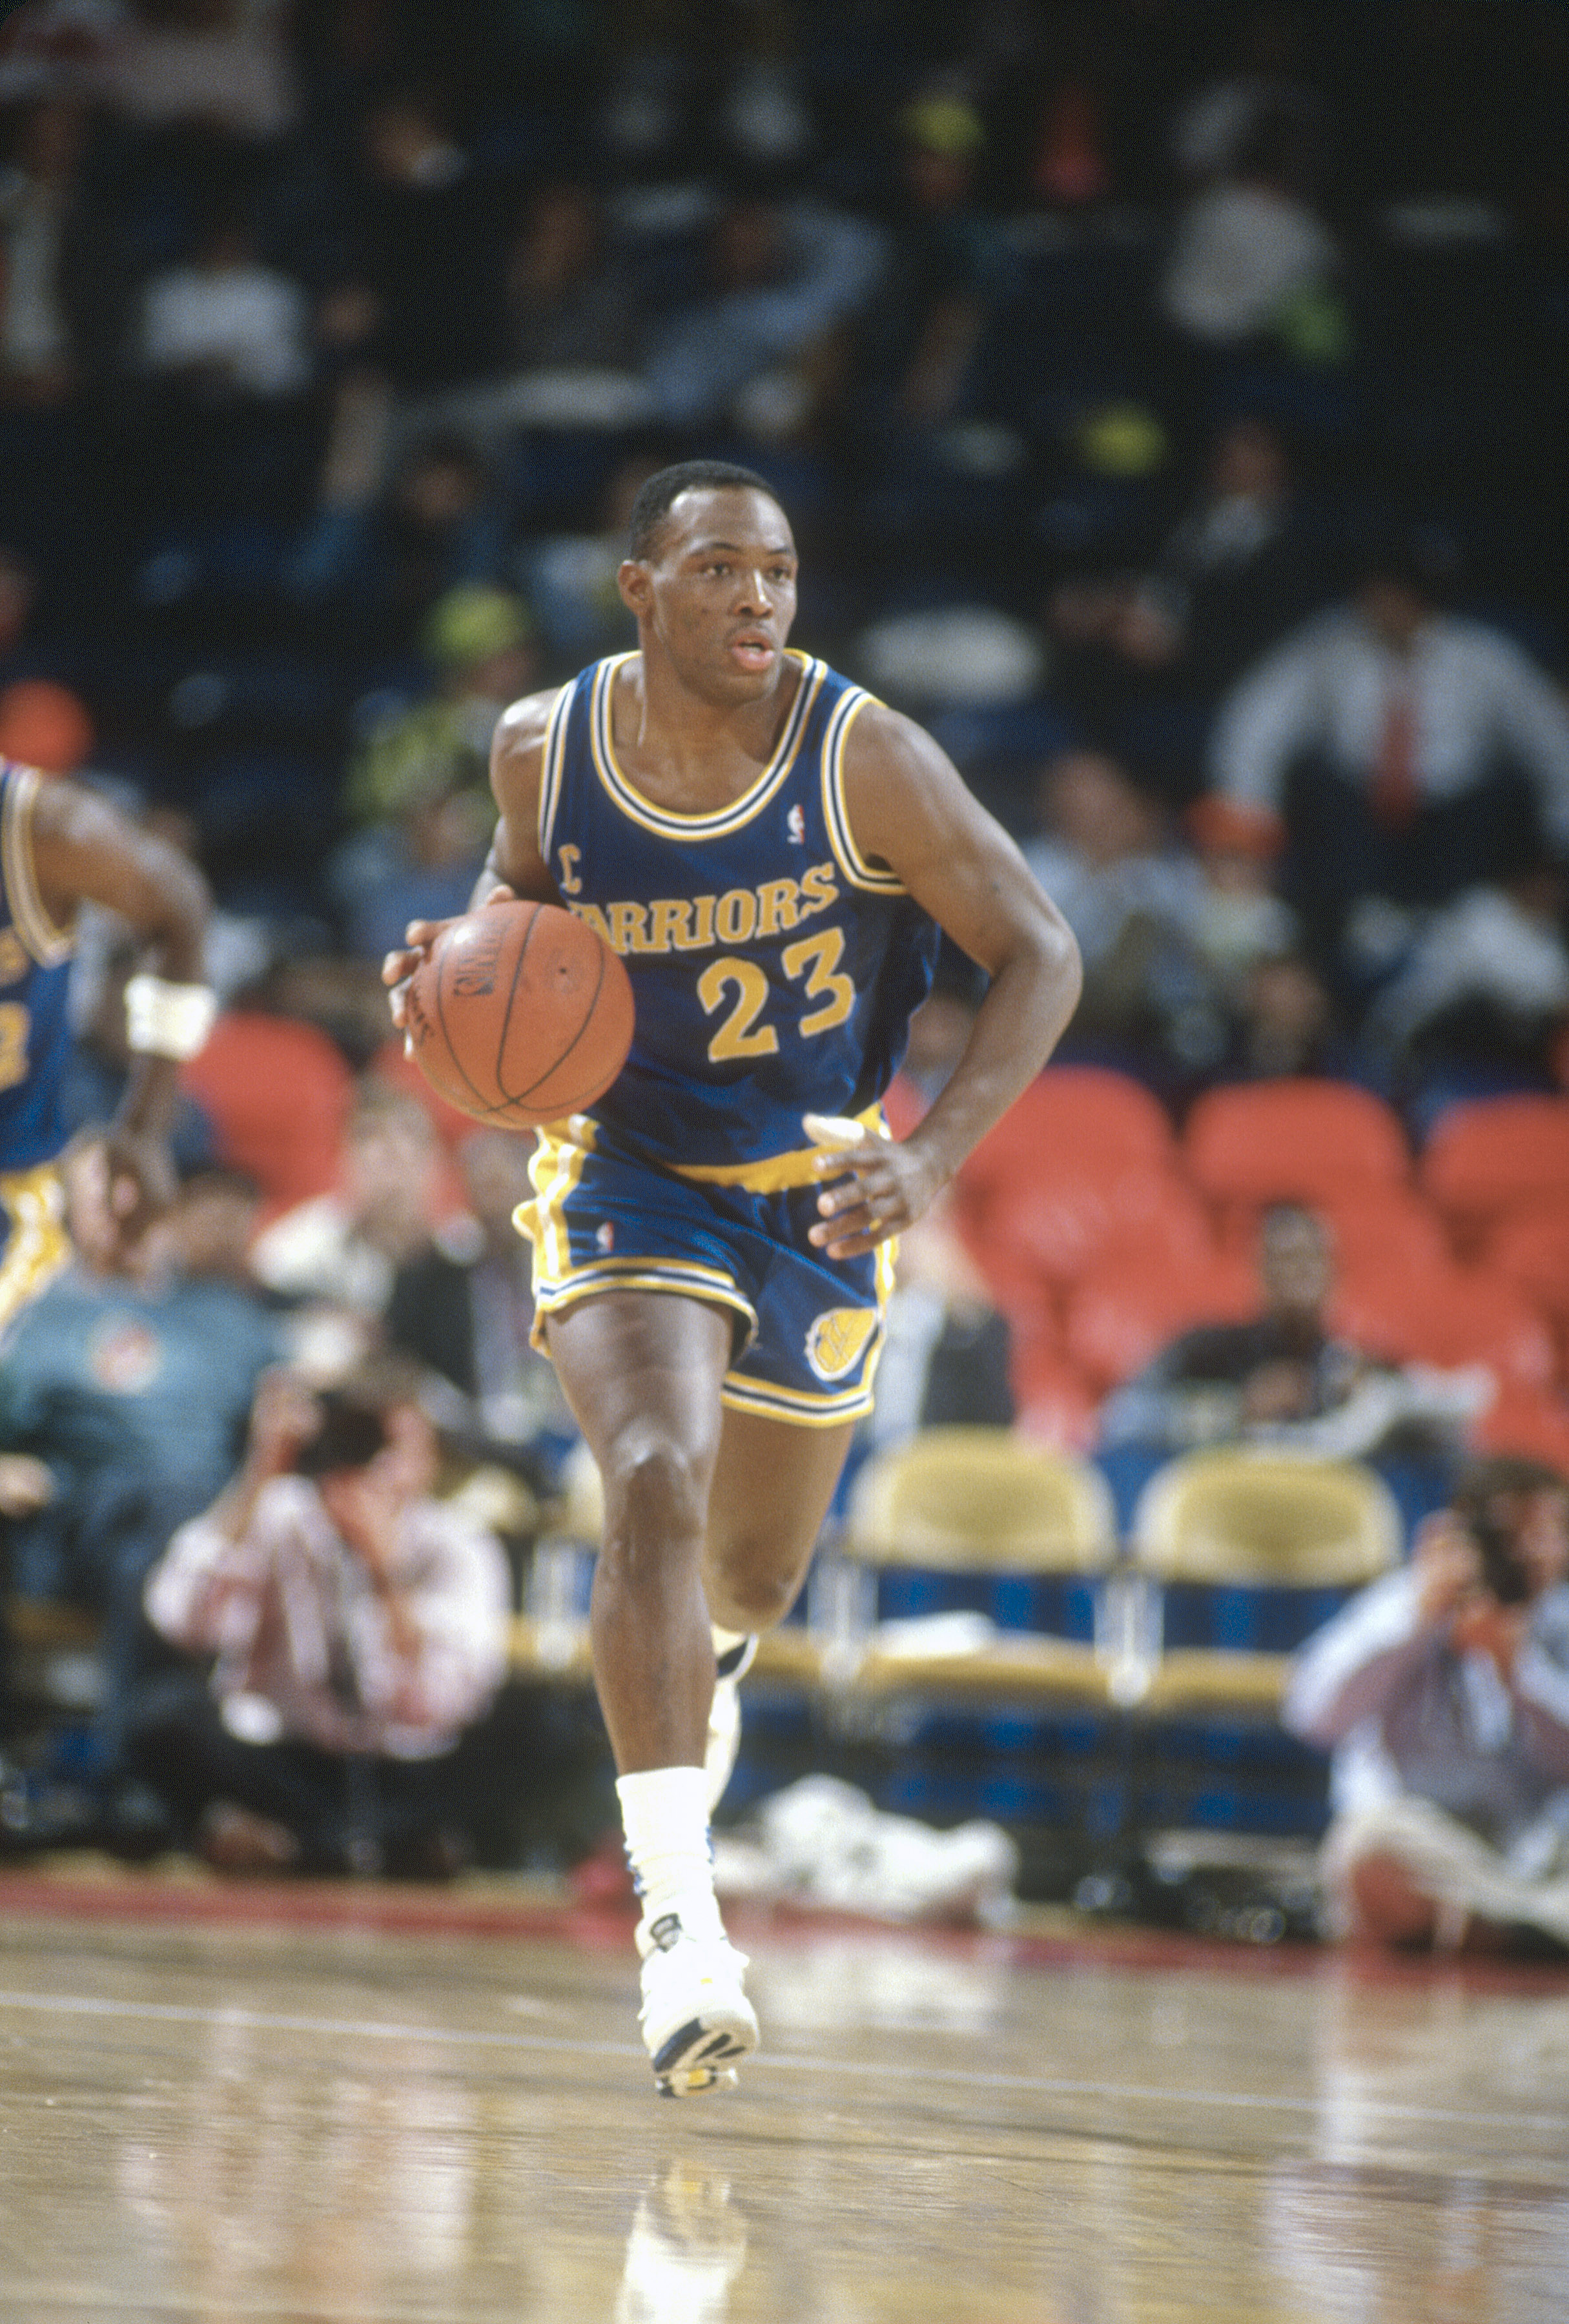 This is a photo of Mitch Richmond in his 1990 season with the Warriors.